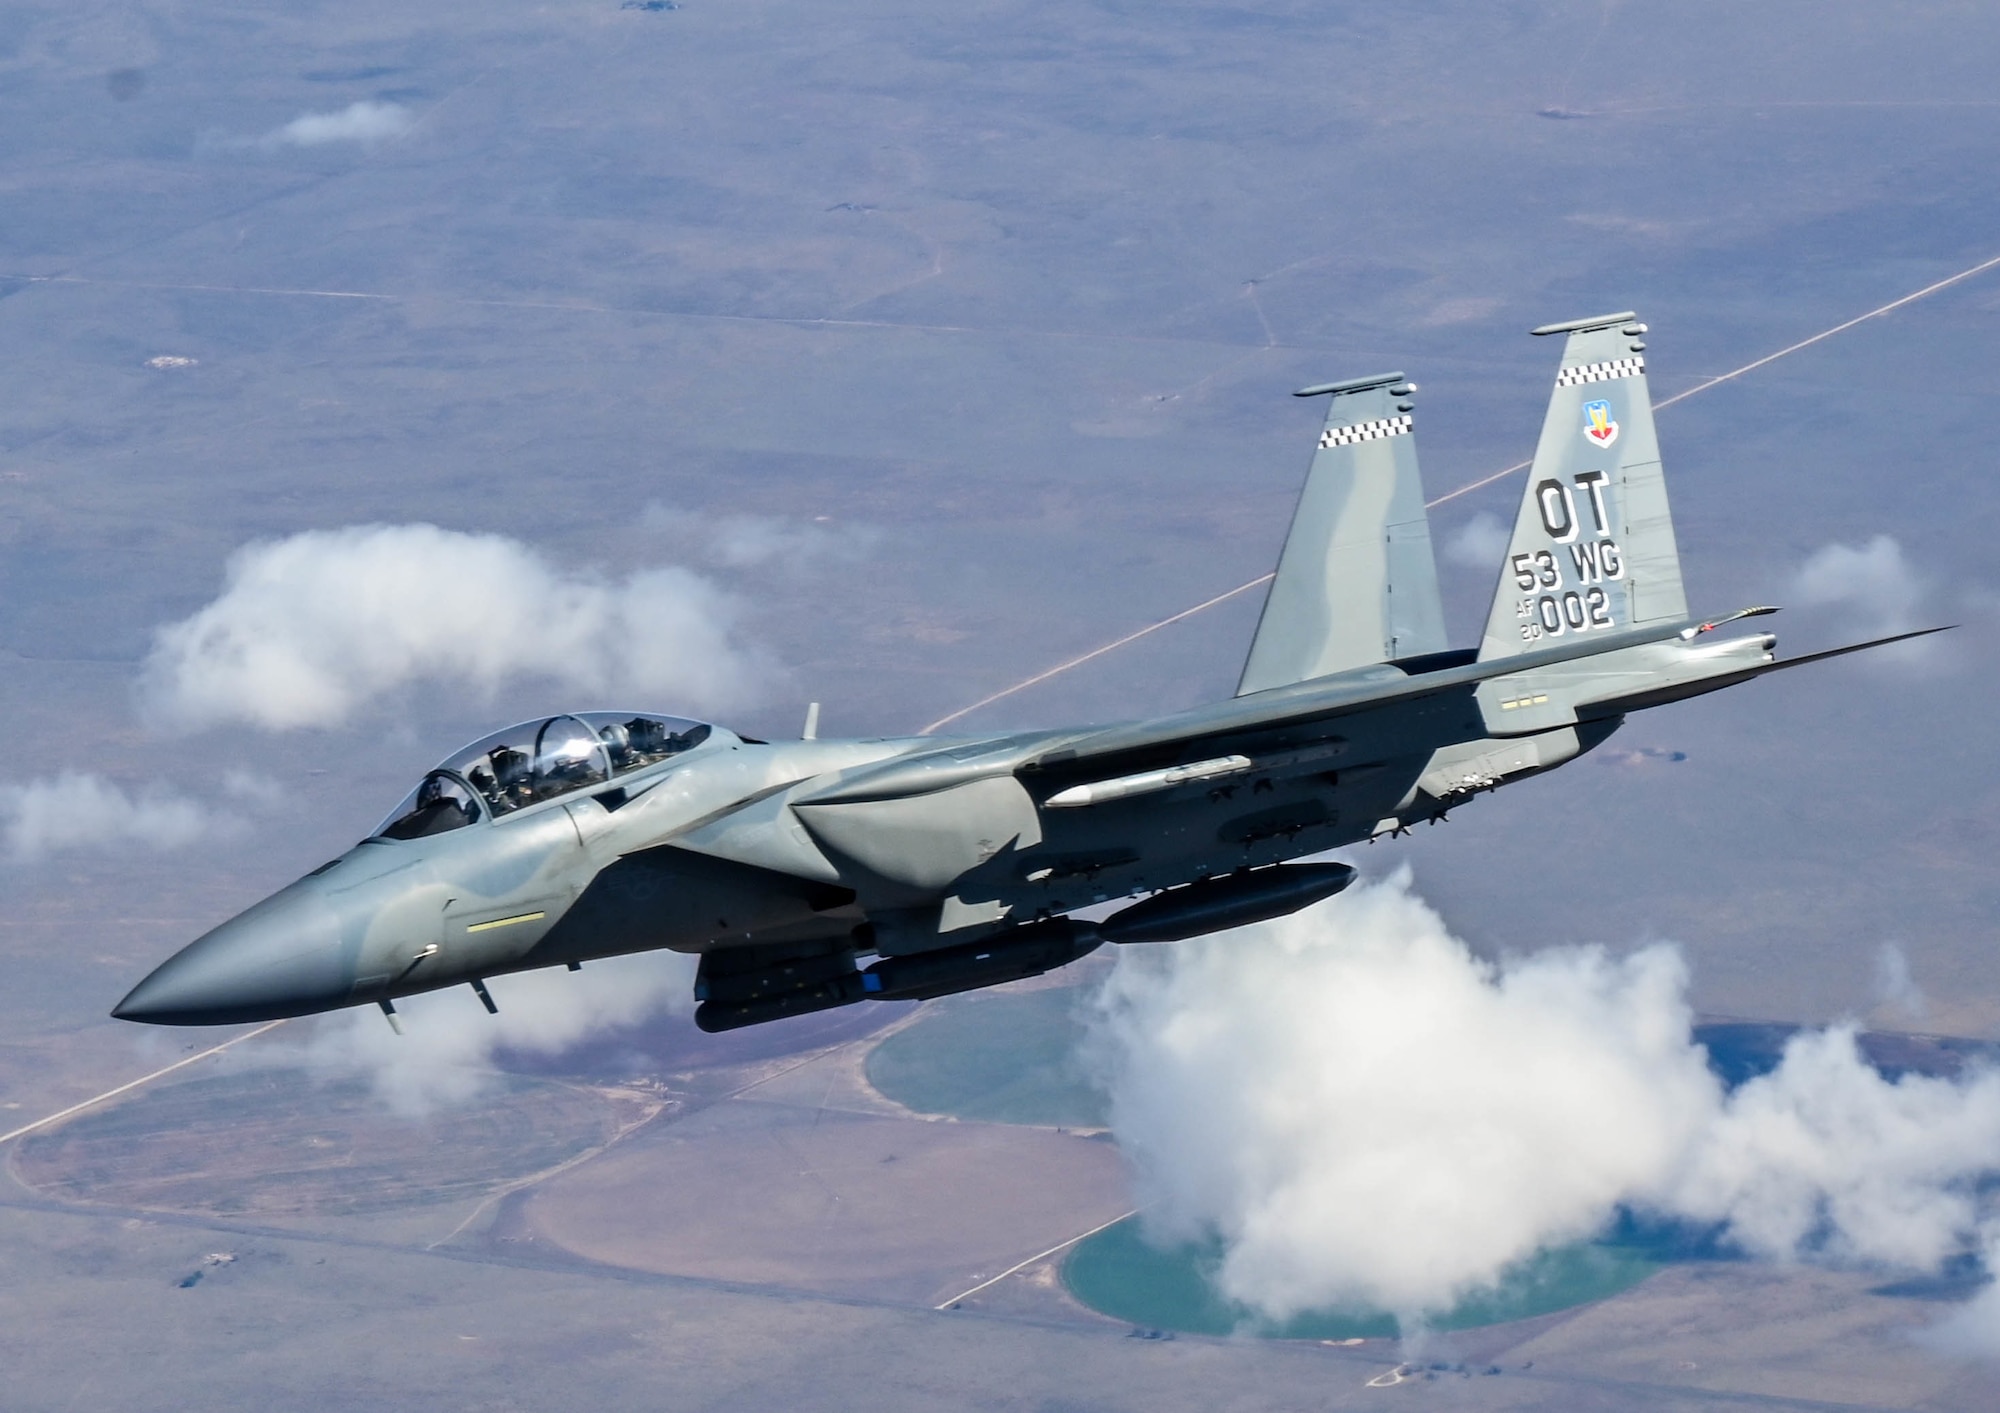 A F-15EX assigned to the 85th Test and Evaluation Squadron, Eglin Air Force Base, Florida, flies behind a KC-135 assigned to the 465th Air Refueling Squadron, Tinker AFB, Oklahoma, Oct. 15, 2021. In-air refueling allows fighter aircraft to stay airborne for longer periods of time without having to land to refuel. (U.S. Air Force photo by 2nd Lt. Mary Begy)